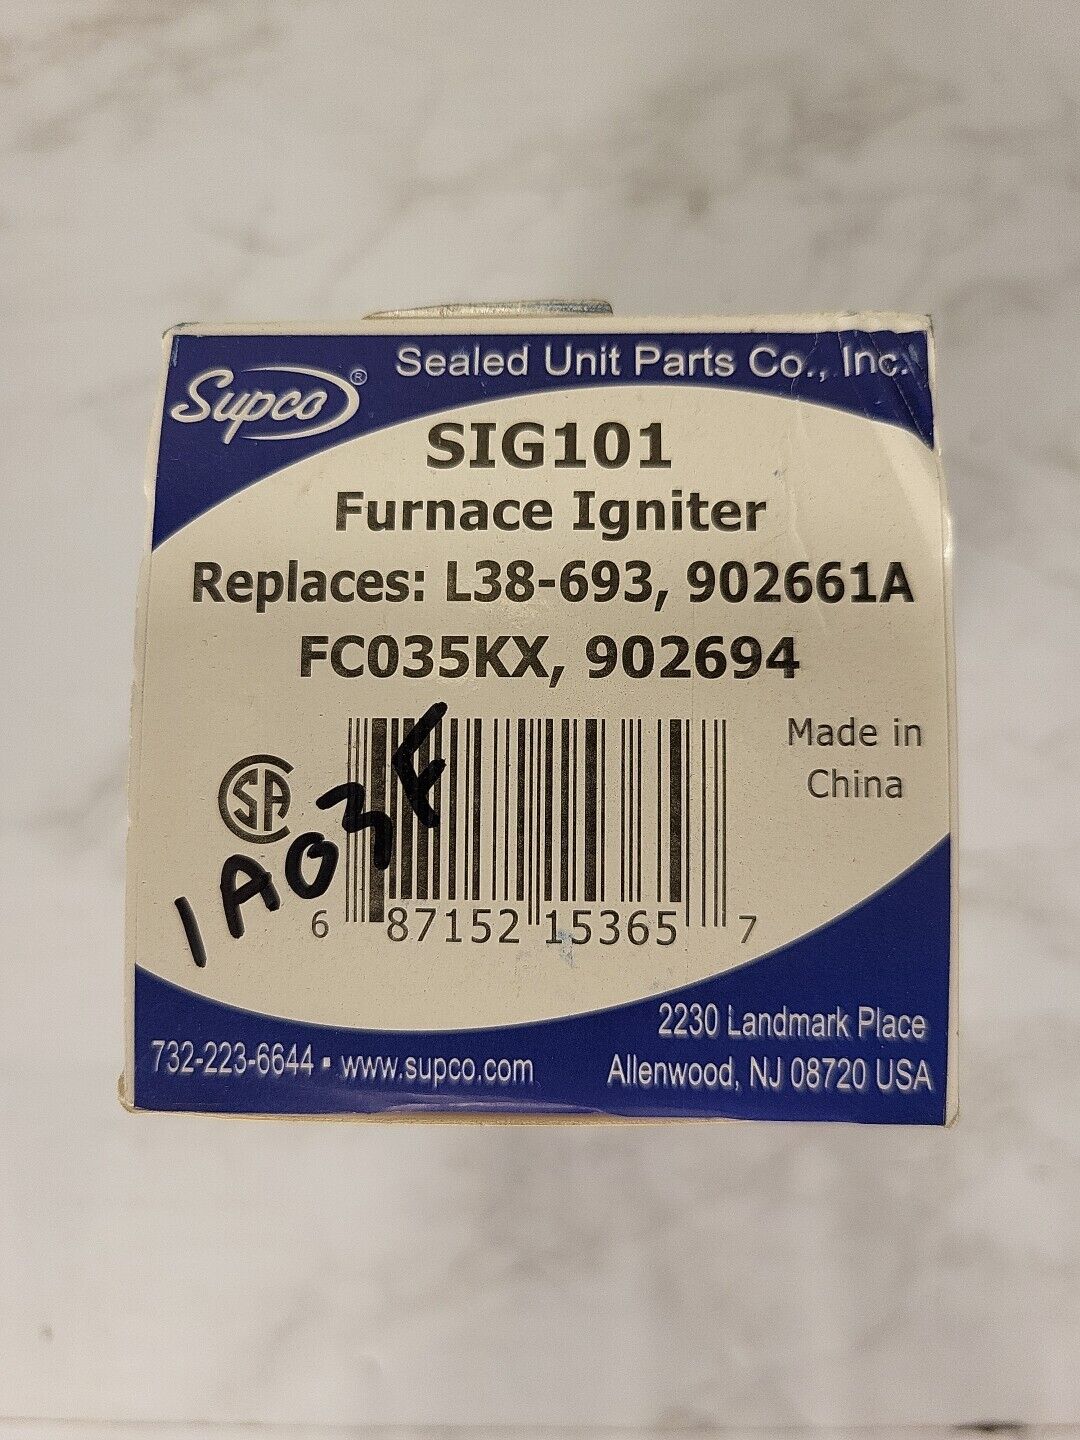 SUPCO SIG101 Gas Furnace Ignitor for Nordyne 902661